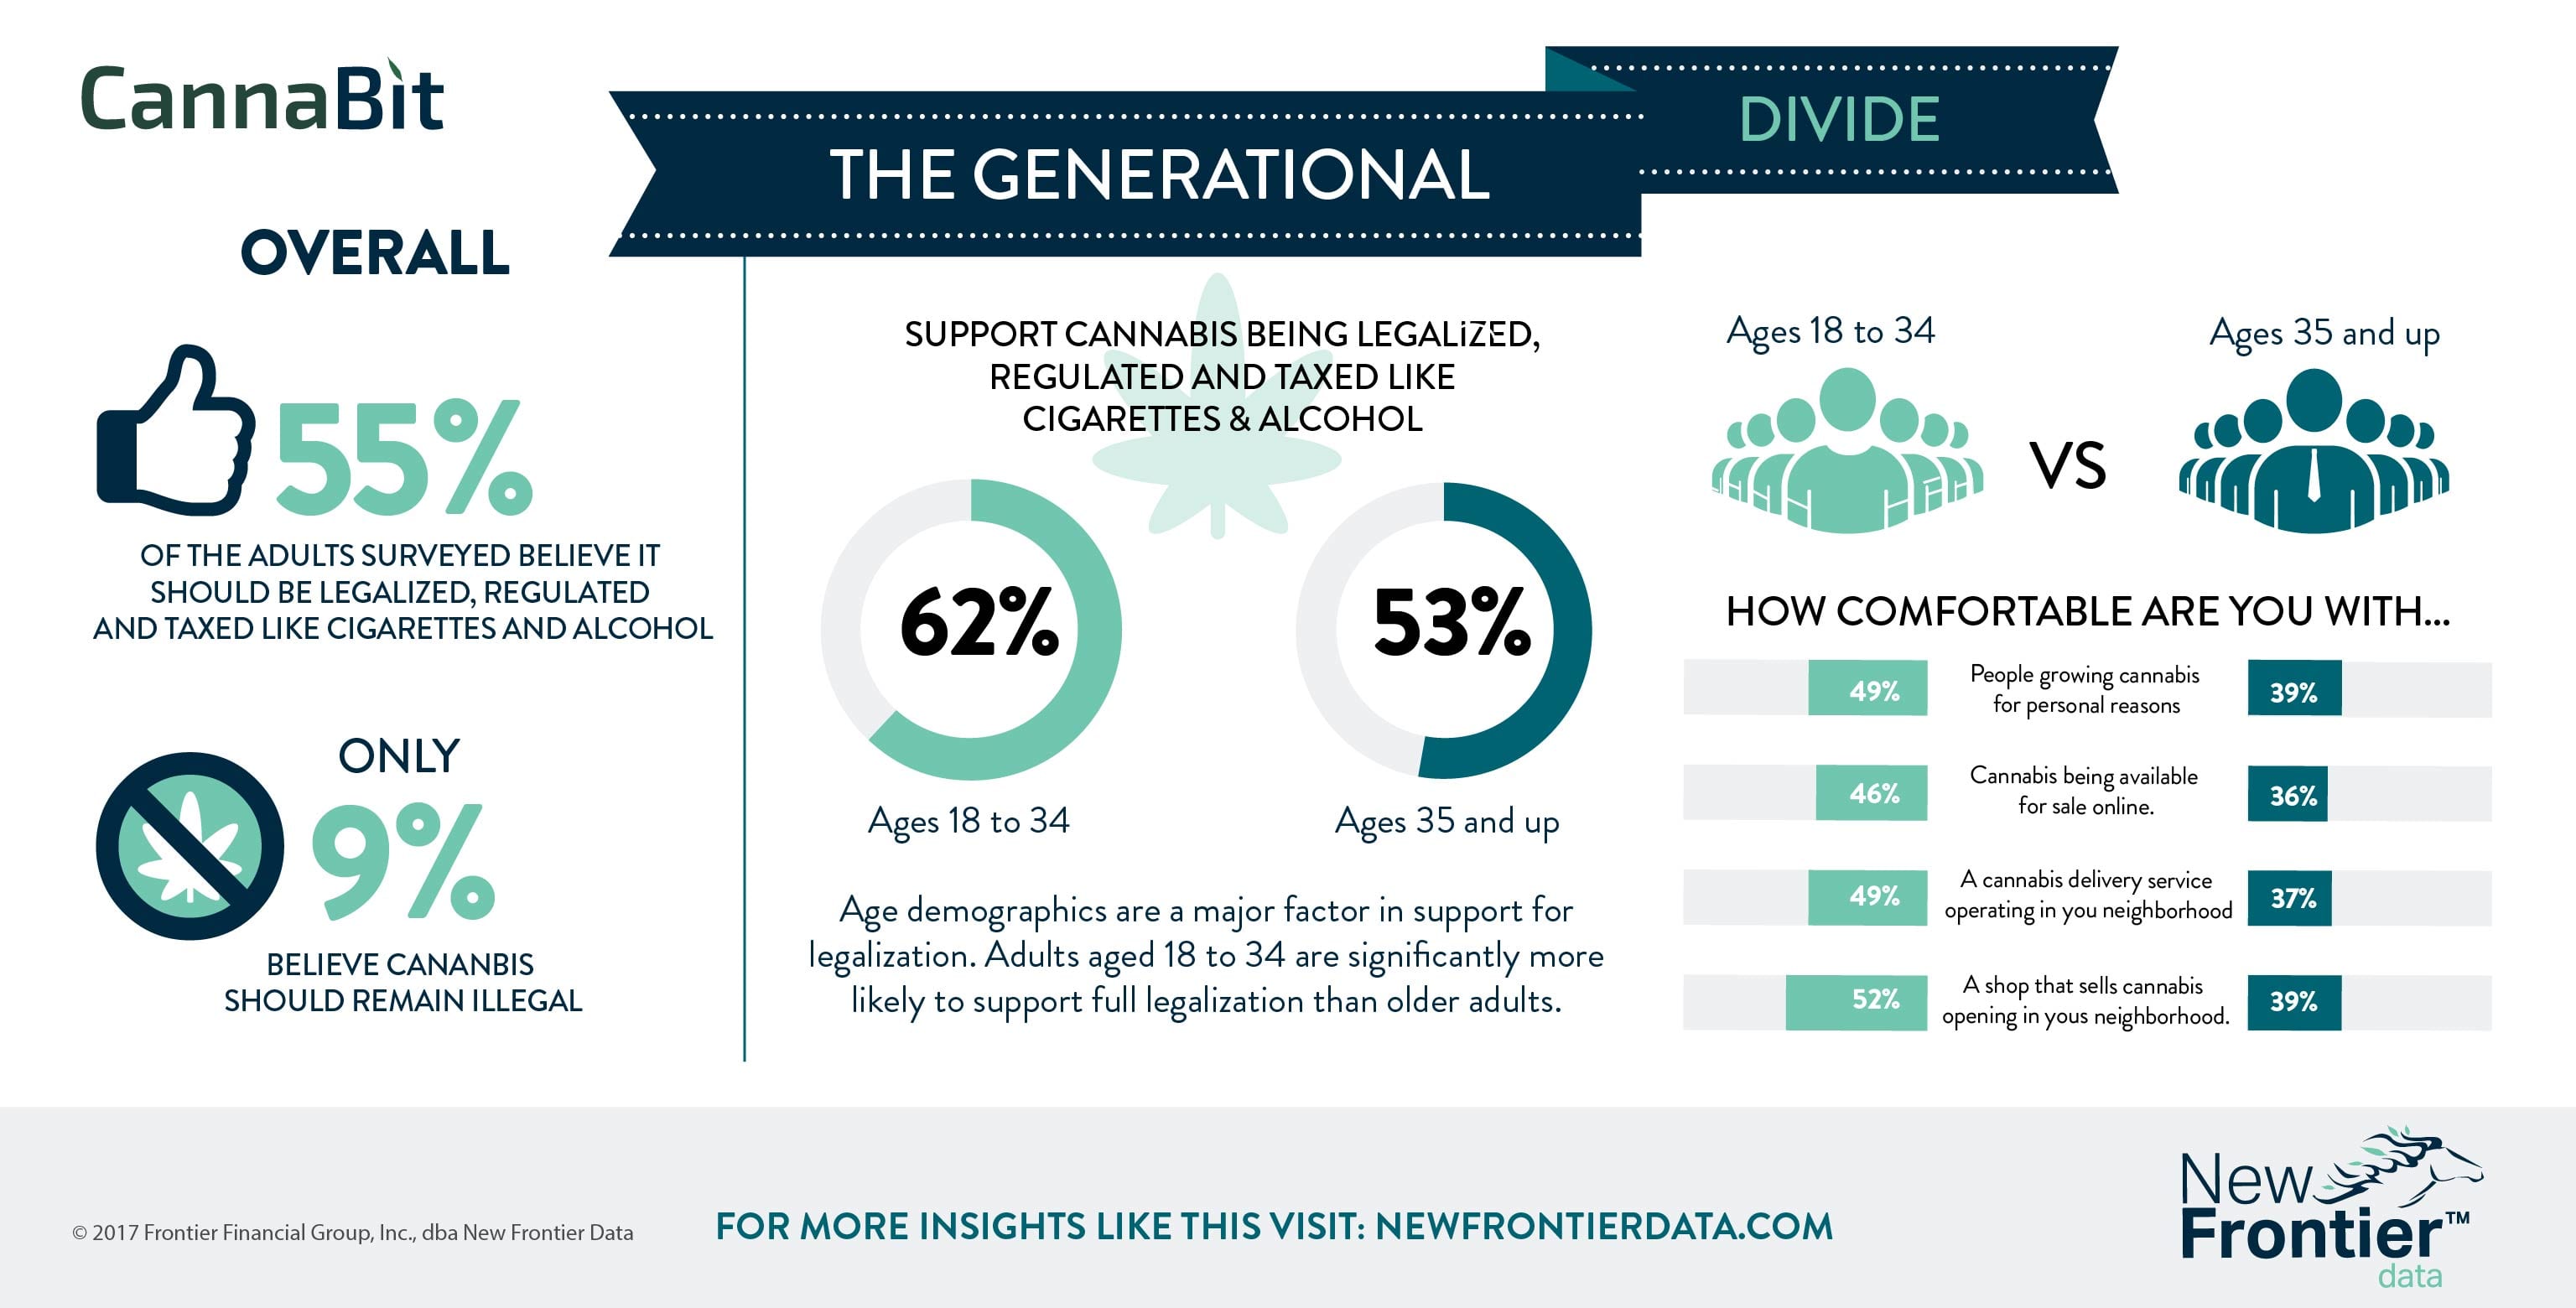 Cannabit: The Generational Divide: How Comfortable Are you with A Cannabis Business In Your Neighborhood?/ 05062017